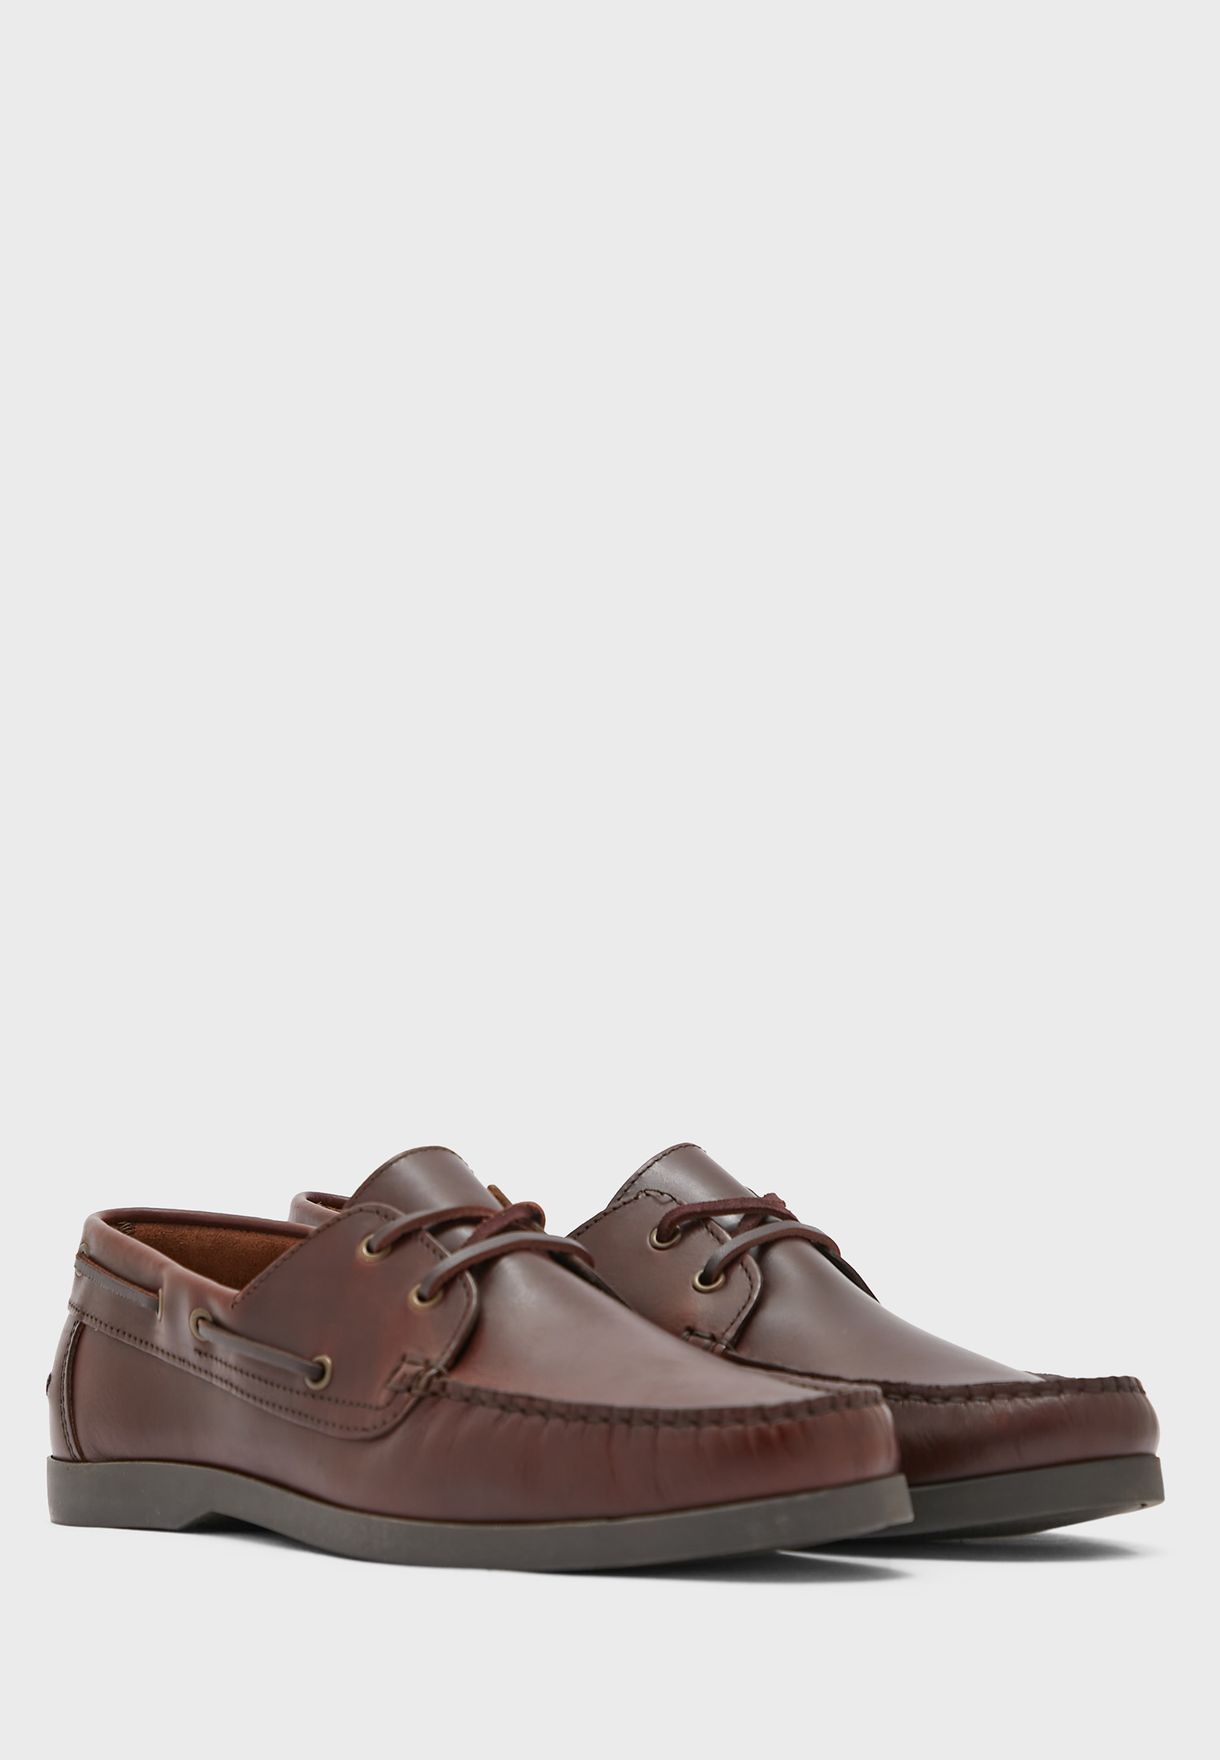 Round Toe Boat Shoes